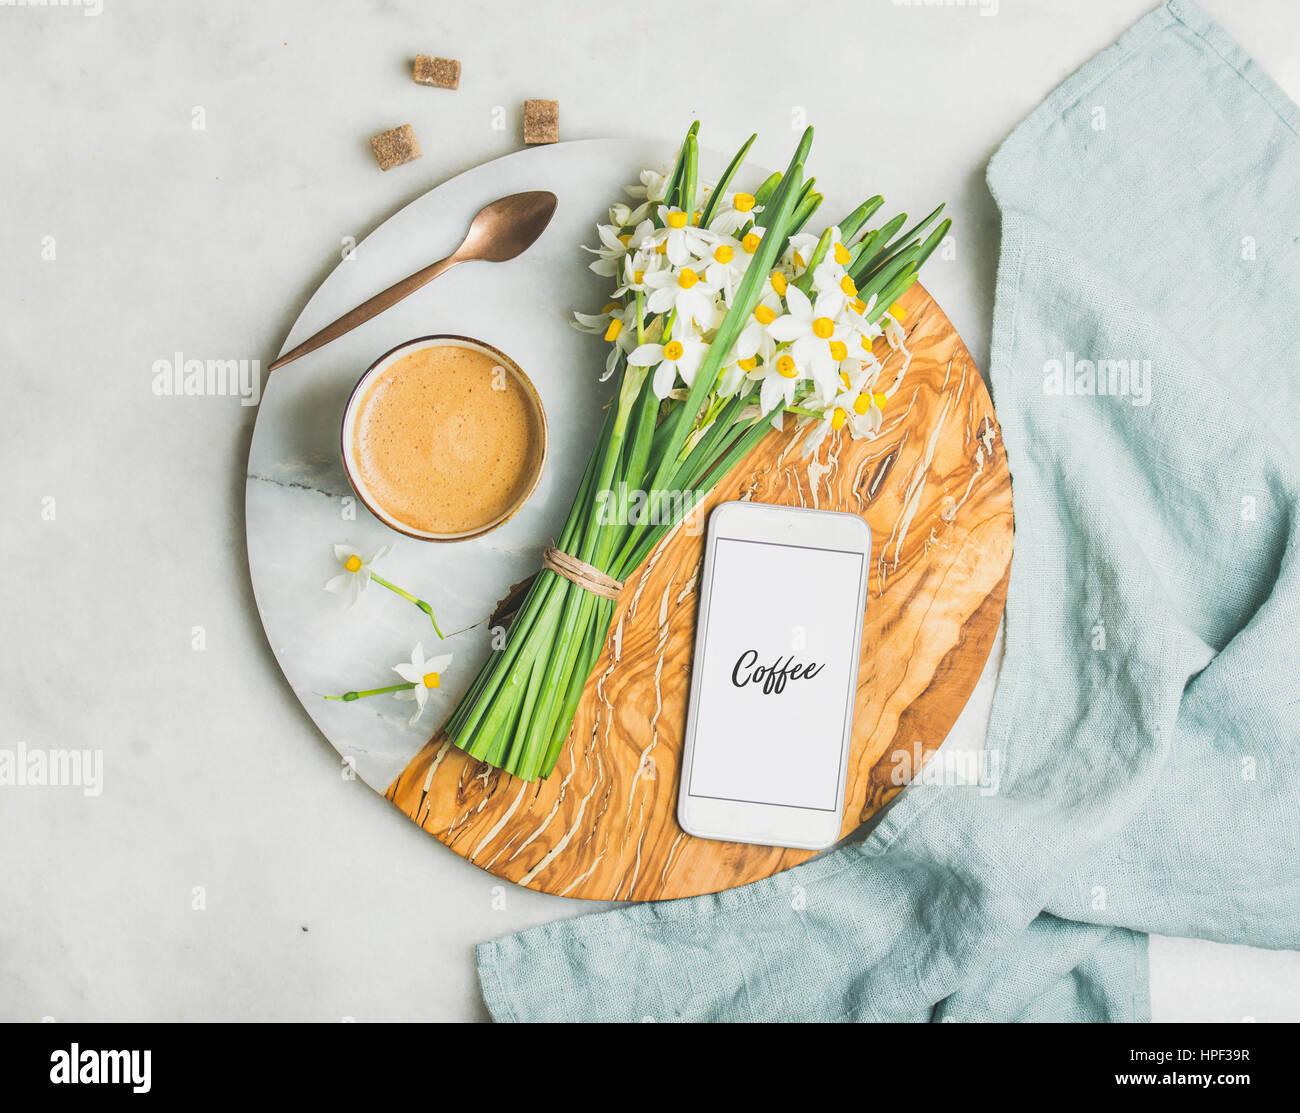 Cup of morning coffee, bucket of spring flowers and mobile phone with text Coffee on serving board over light grey marble background, top view. Mornin Stock Photo